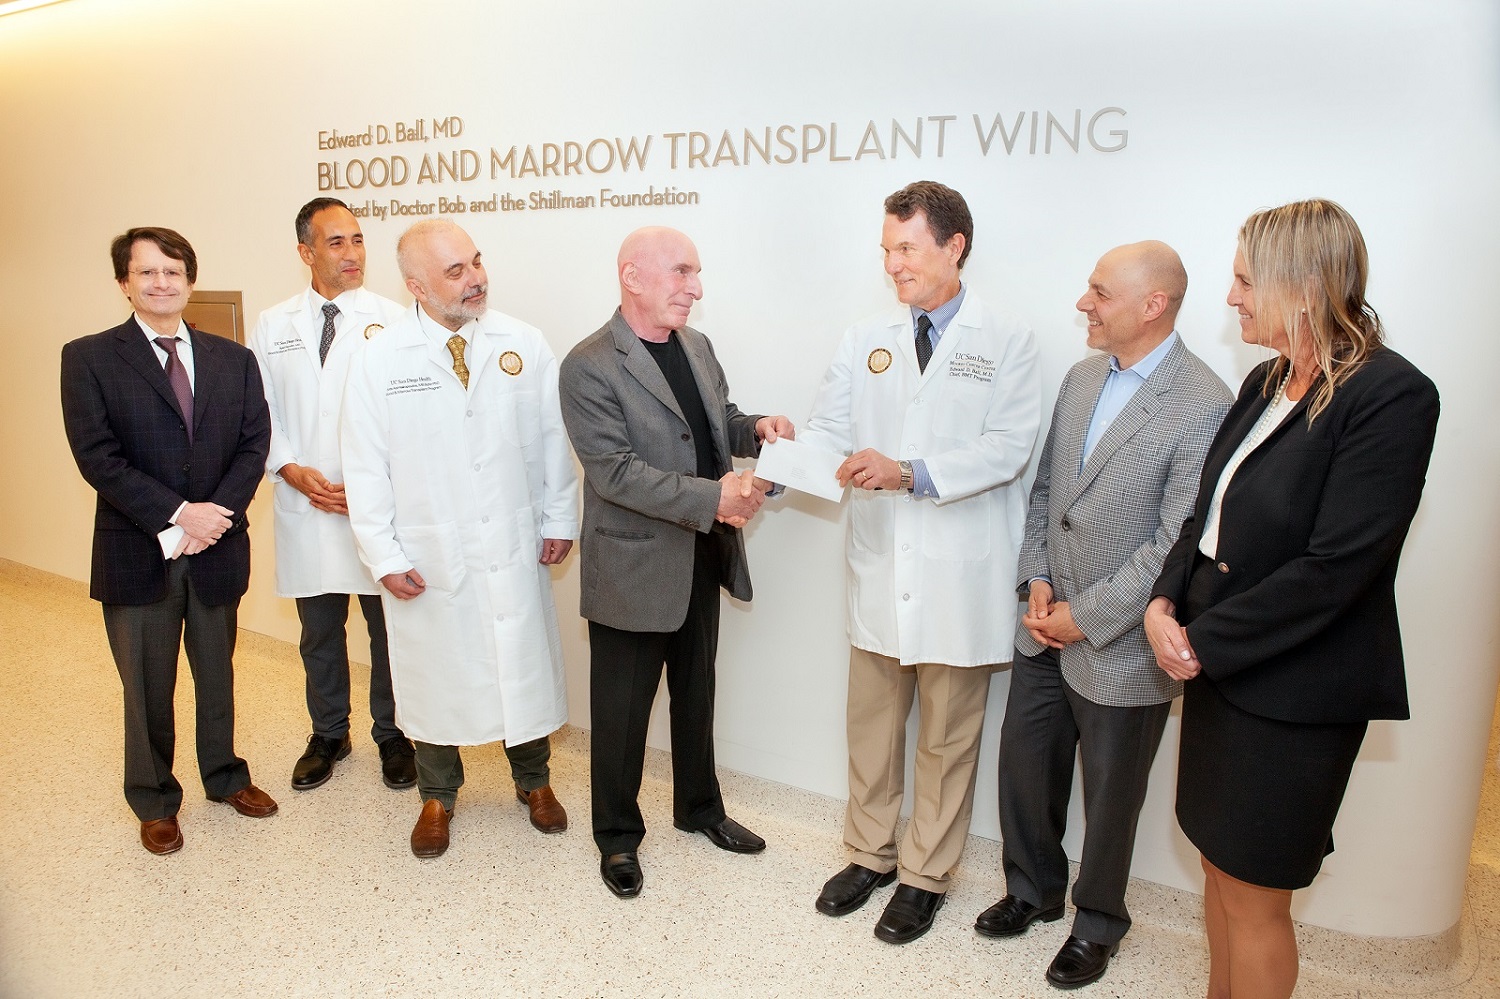 Dr. Bob and Dr. Ball in front of new sign for Blood and Marrow Transplant Wing